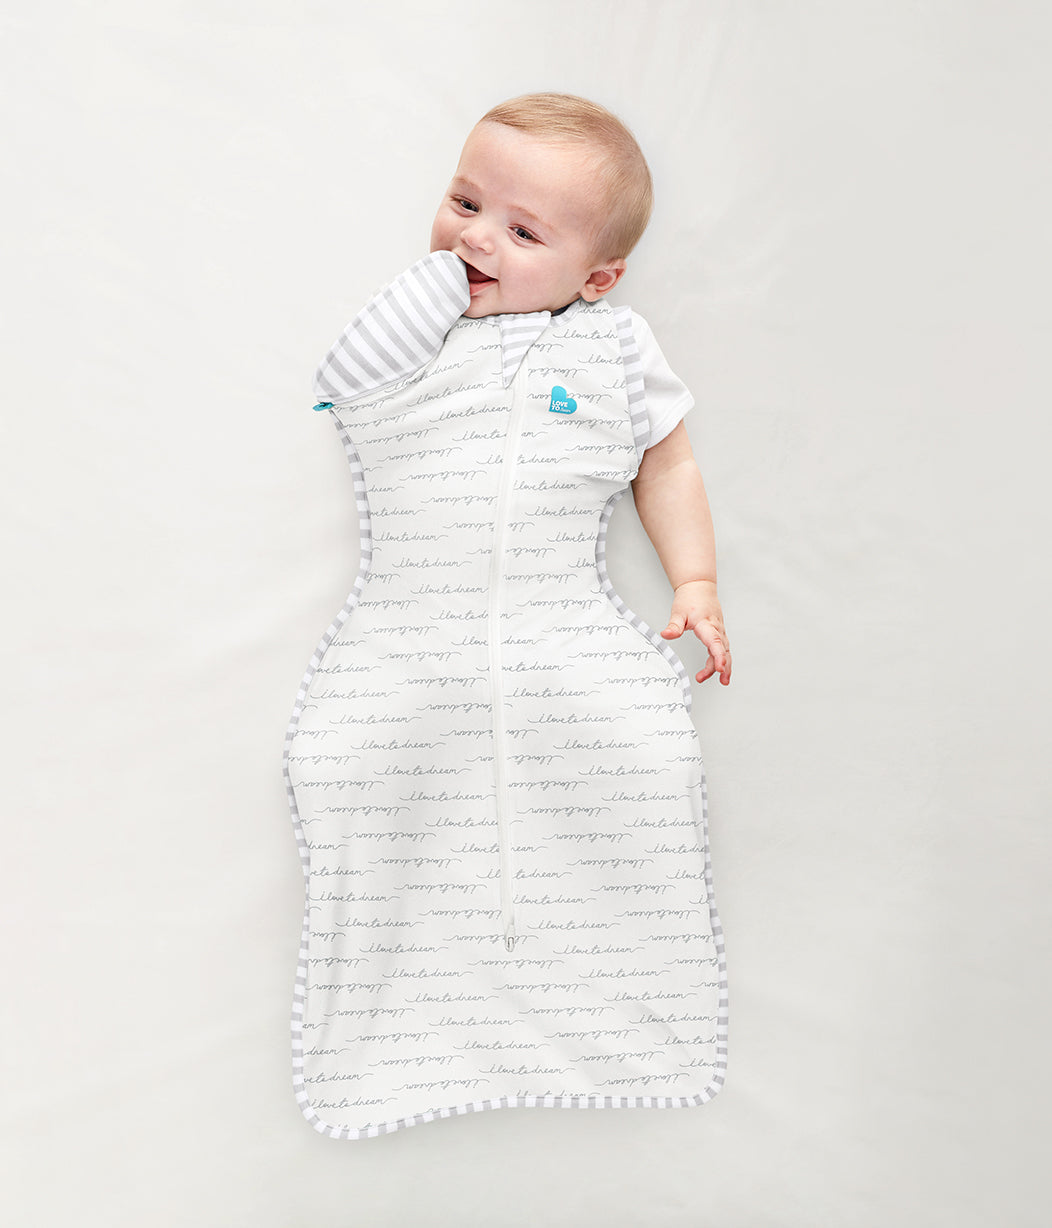 Ready to Roll - when to transition your baby from swaddling